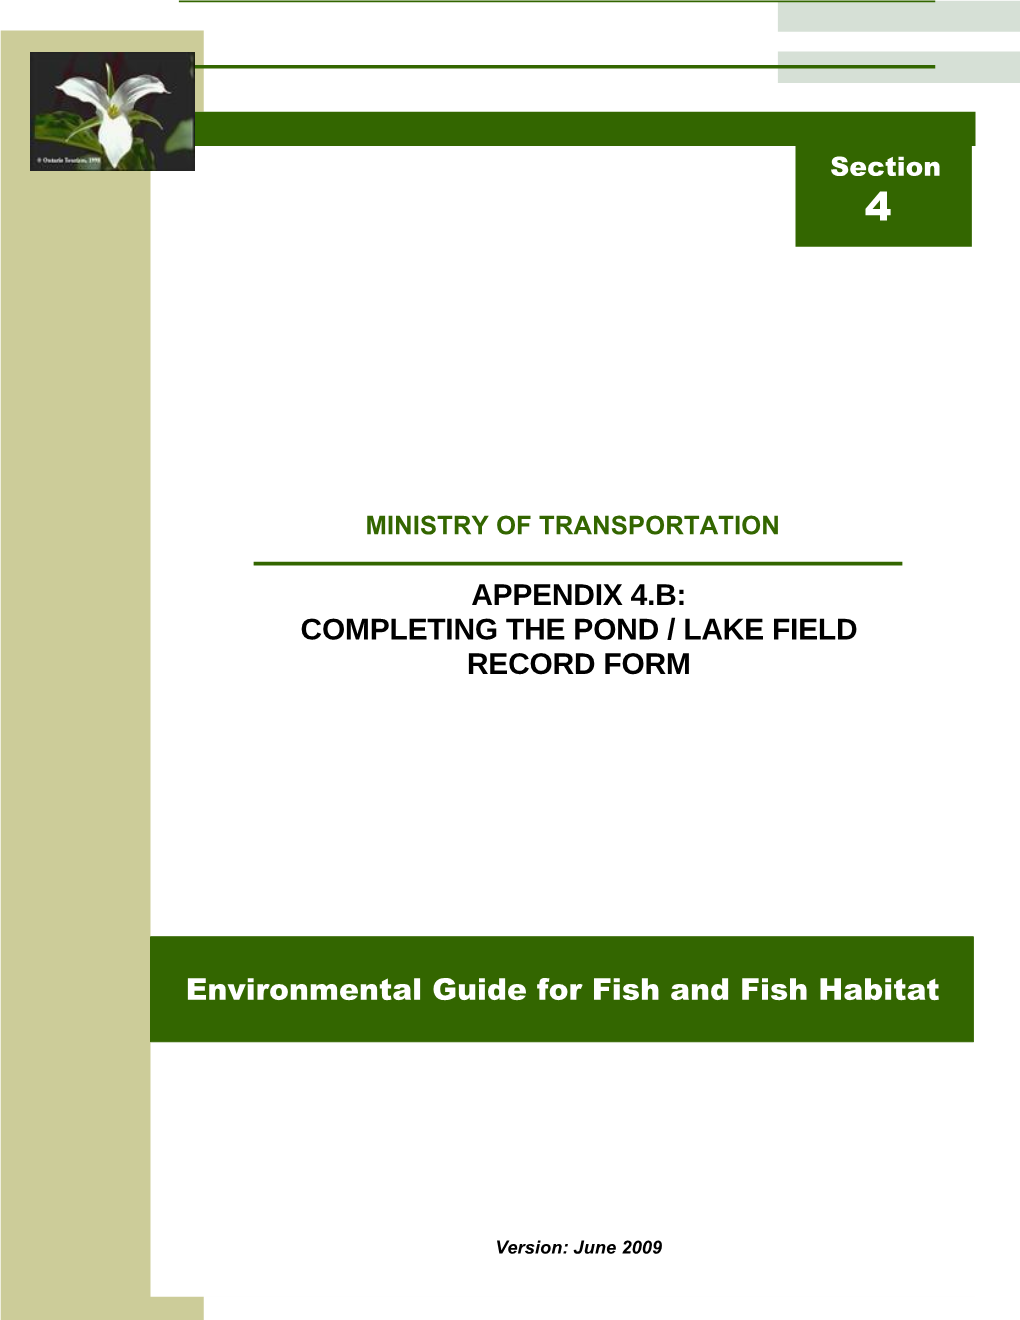 Ministry of Transportation Section 4: Field Investigations